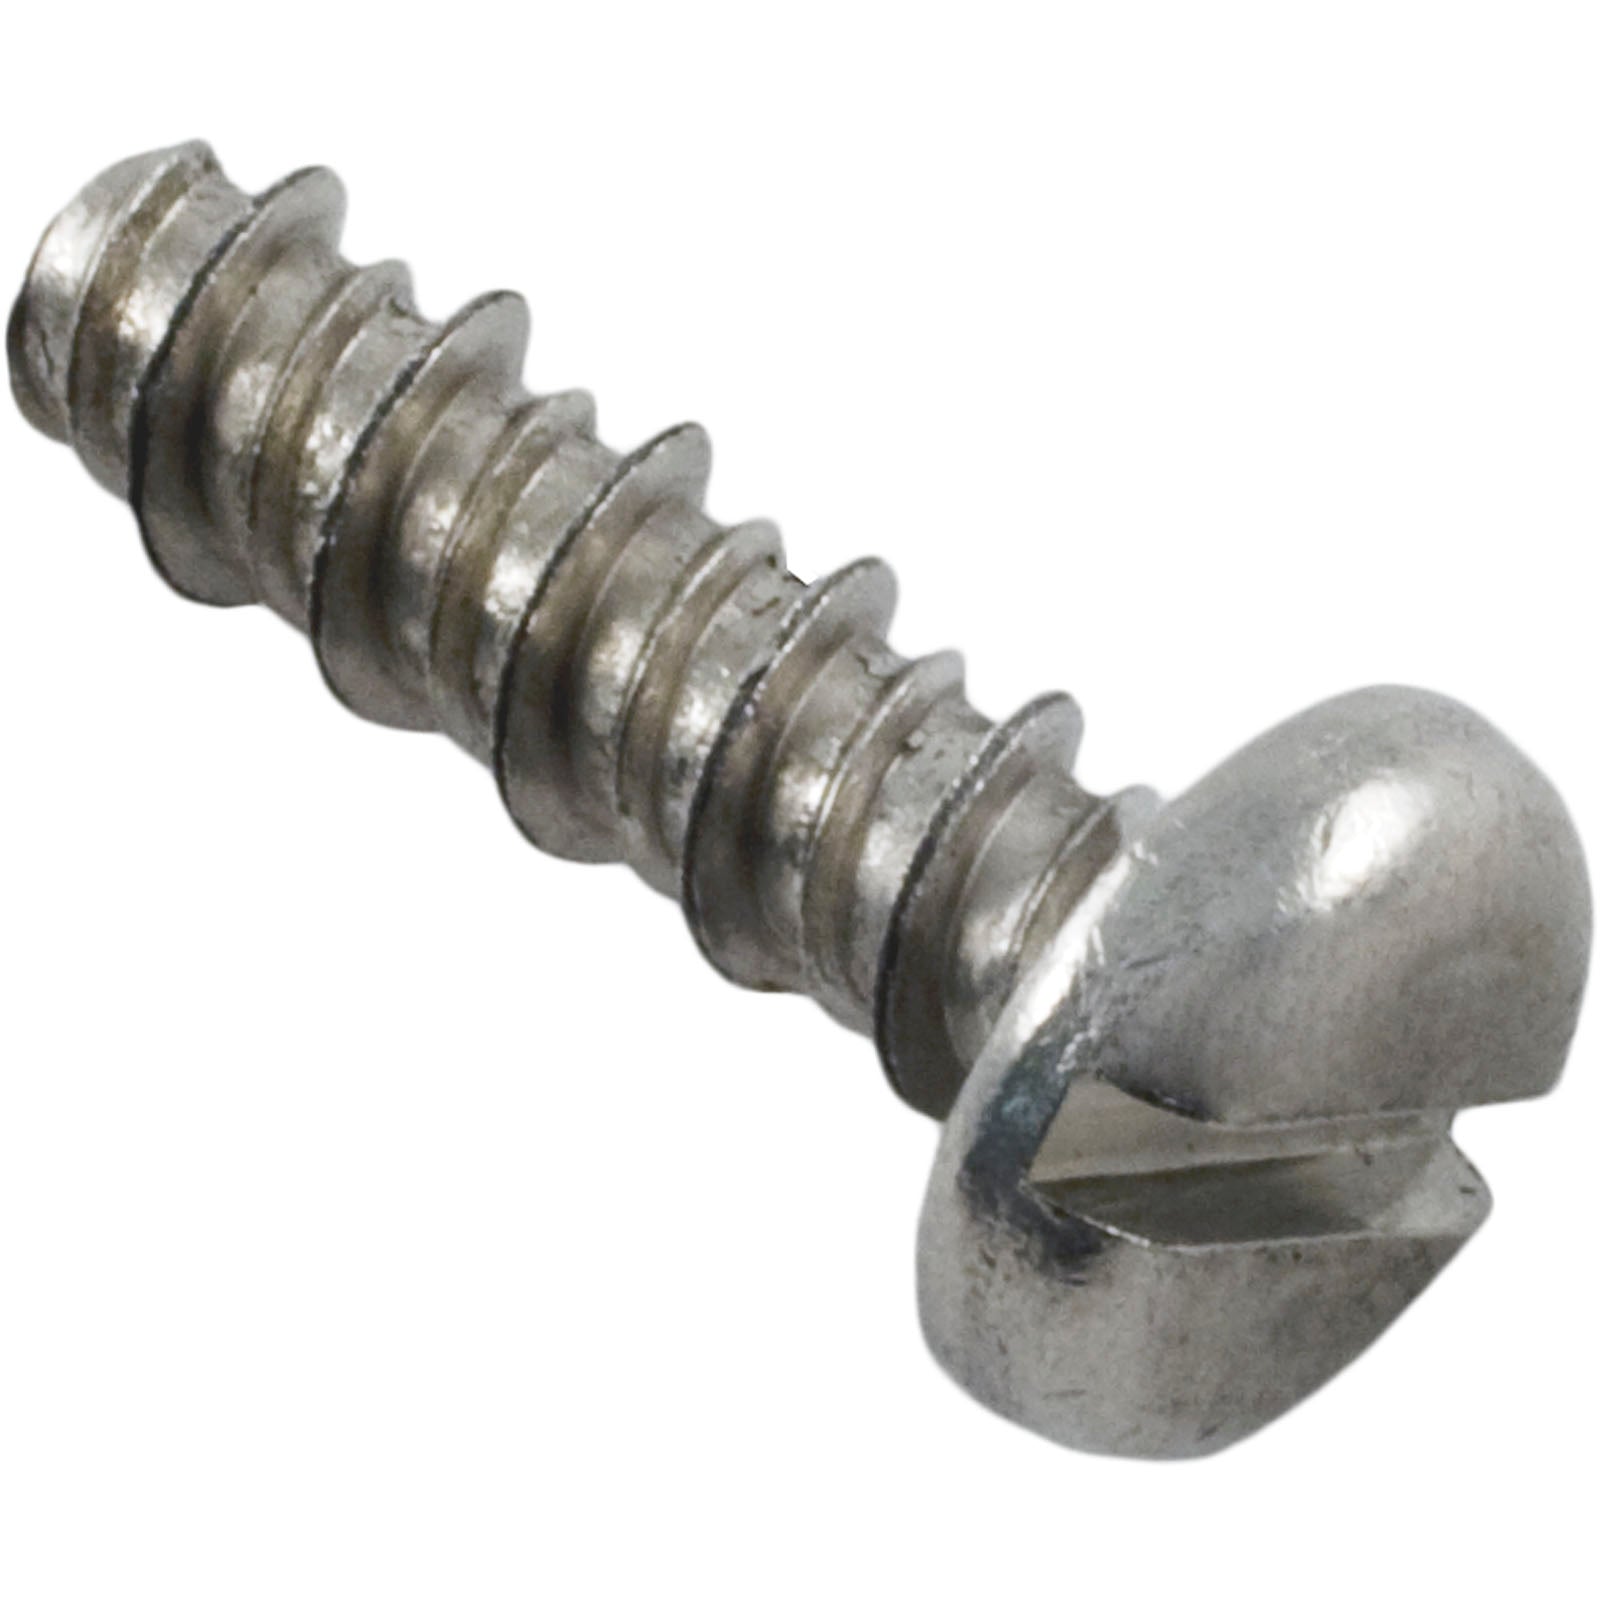 Screw, Pent Rainbow DSF/Safety Skimmer, Faceplate, 13-16 x 3/4"-  R172475